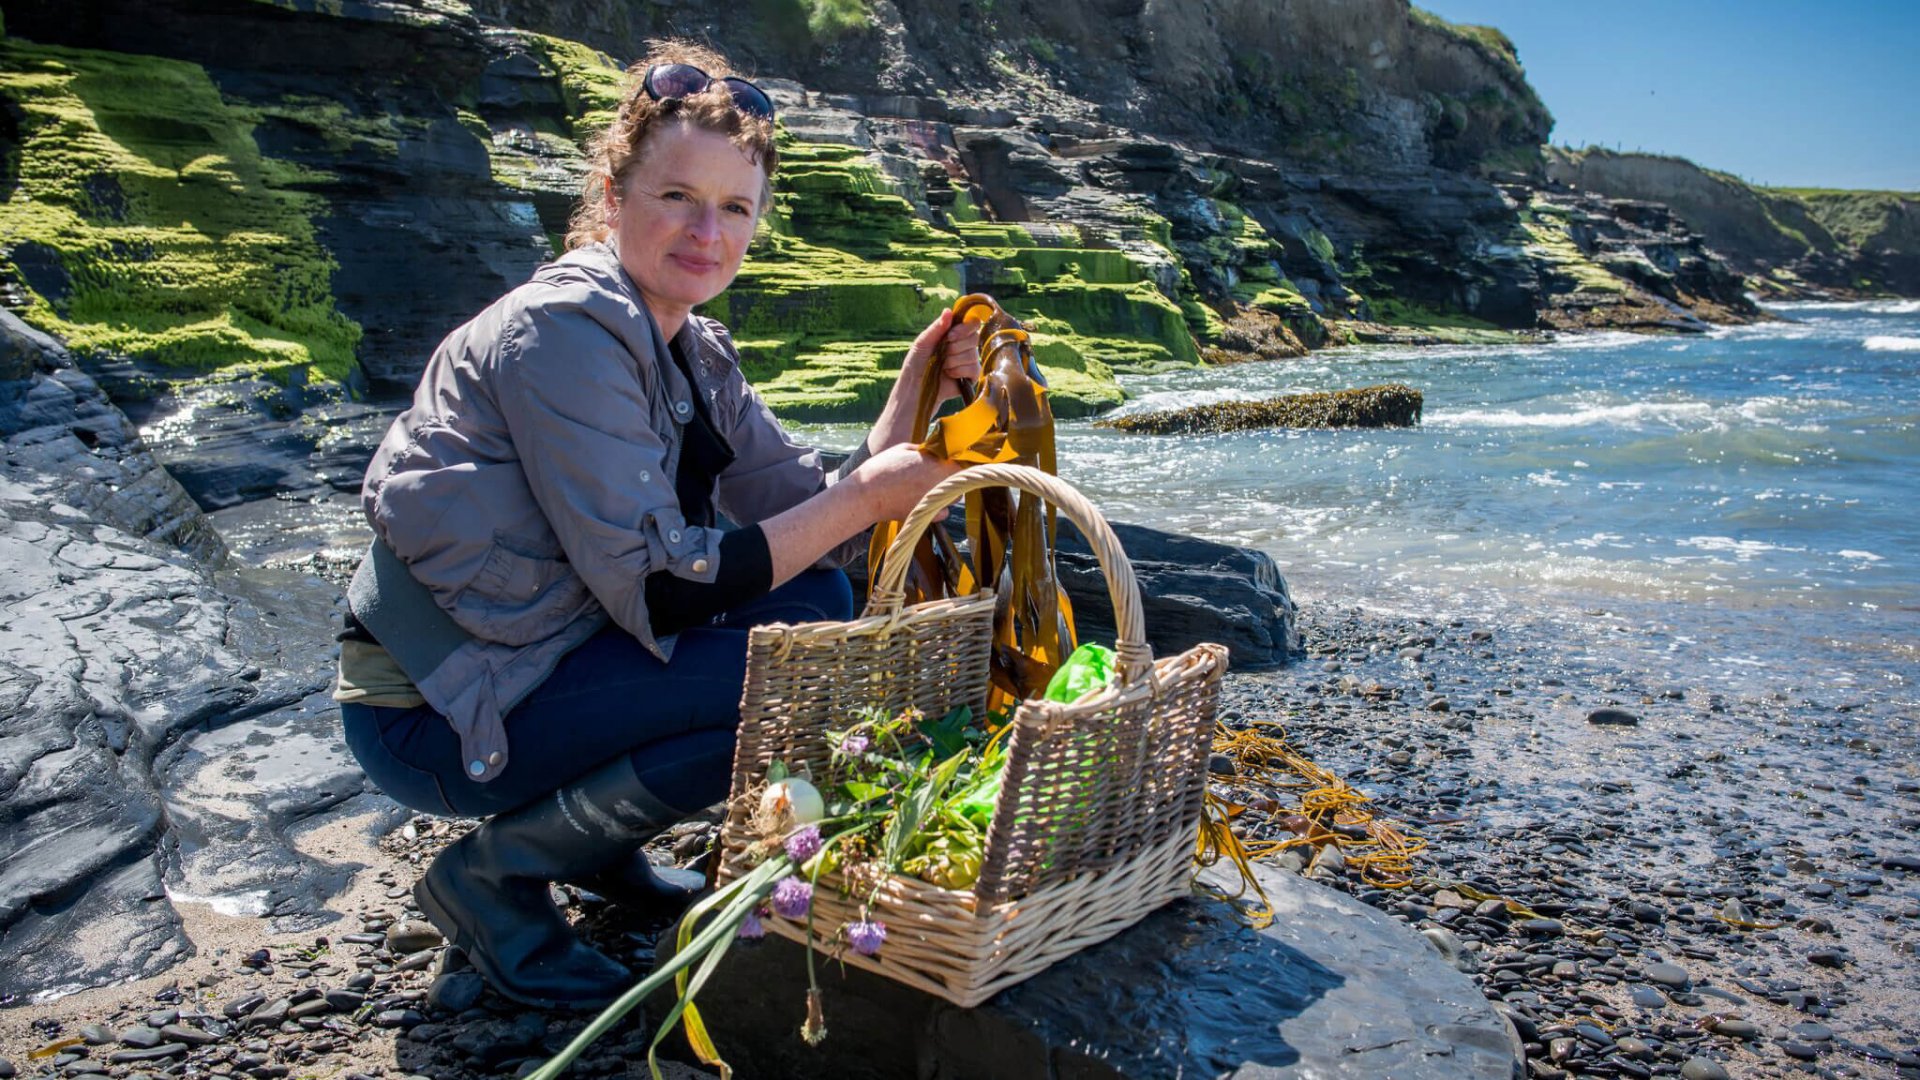 Forager at the seashore with basket of wild food from Ireland